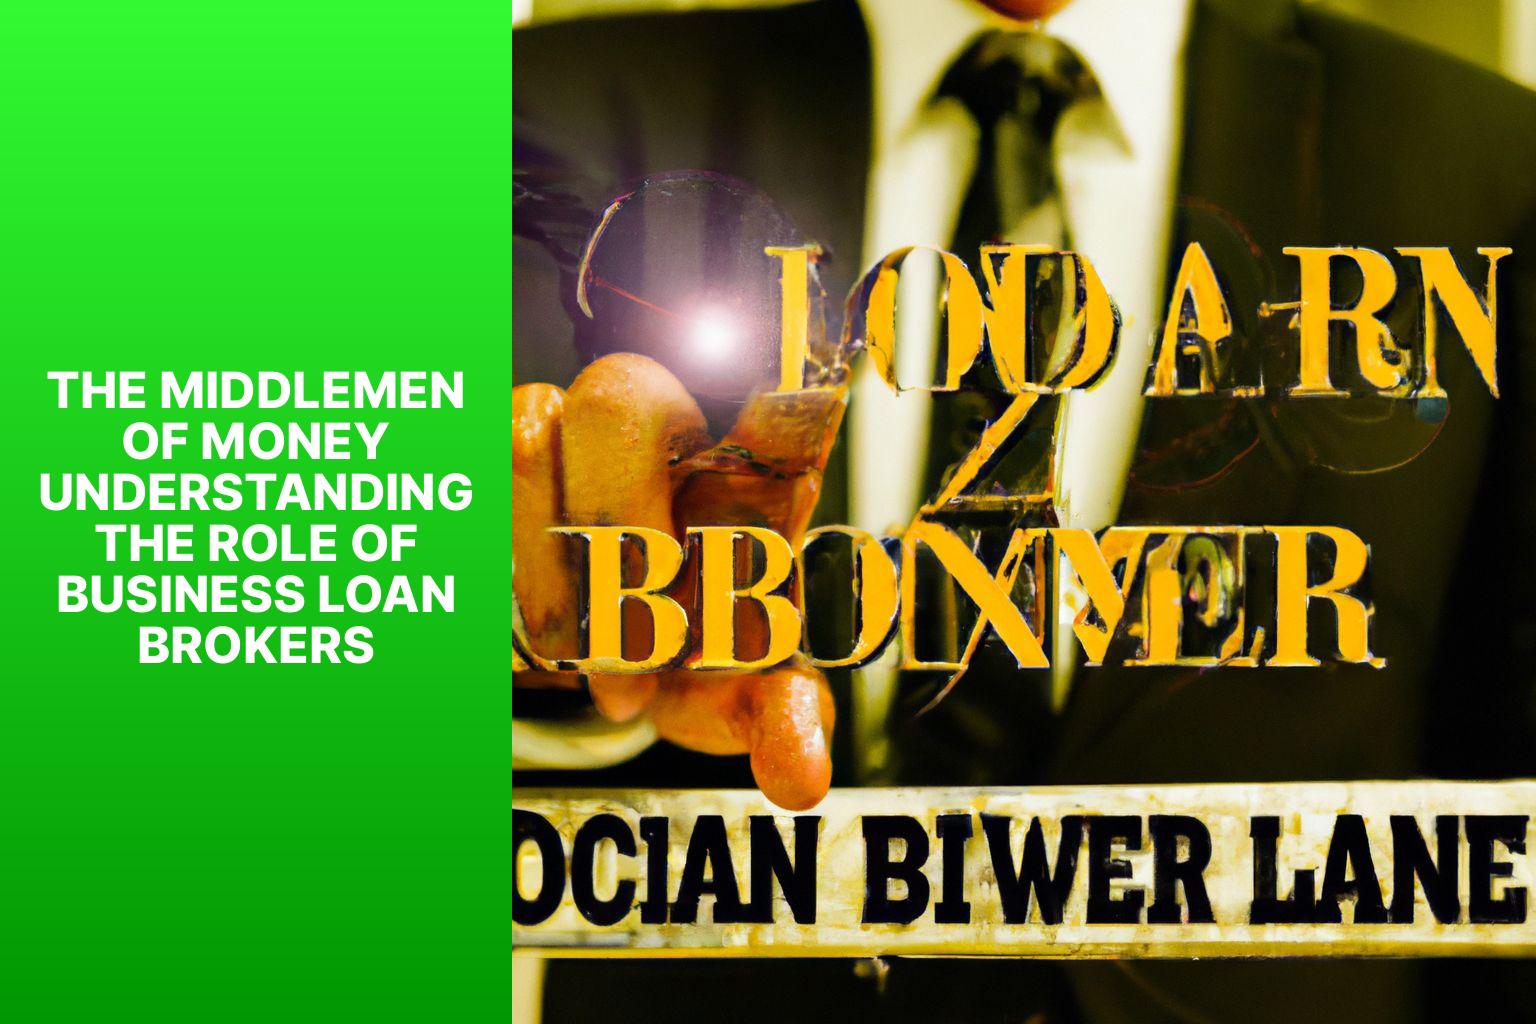 The Middlemen of Money Understanding the Role of Business Loan Brokers